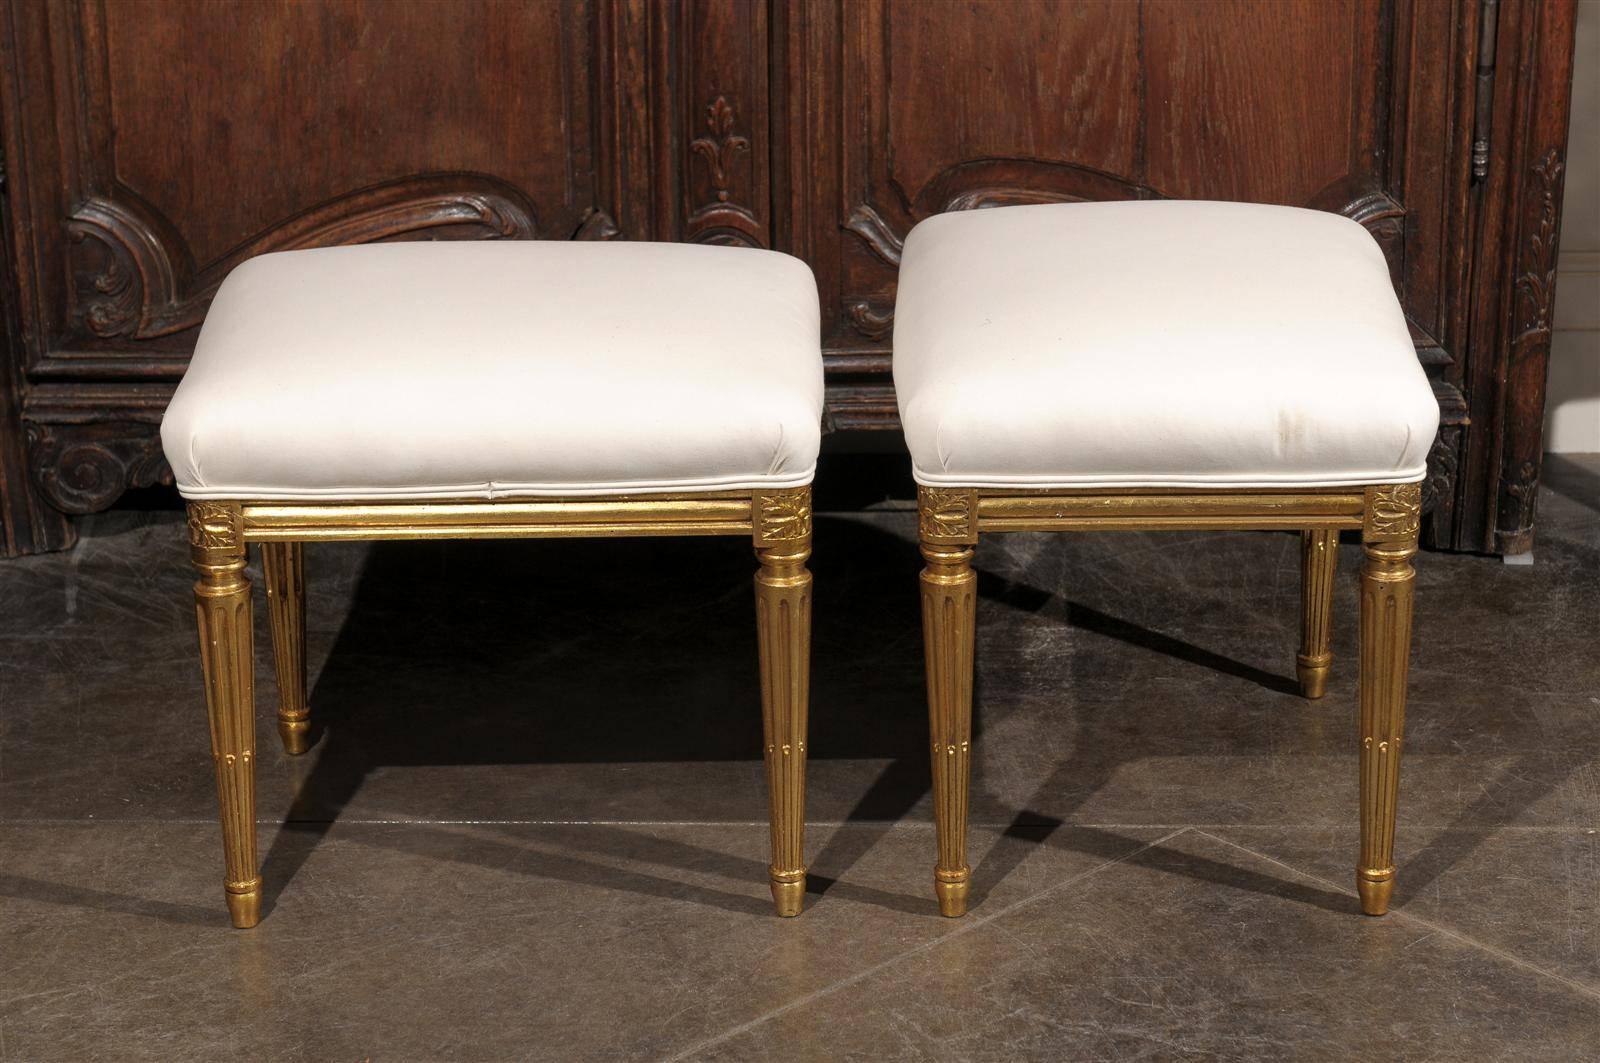 Pair of French Early 20th Century Upholstered Stools with Giltwood Legs For Sale 4